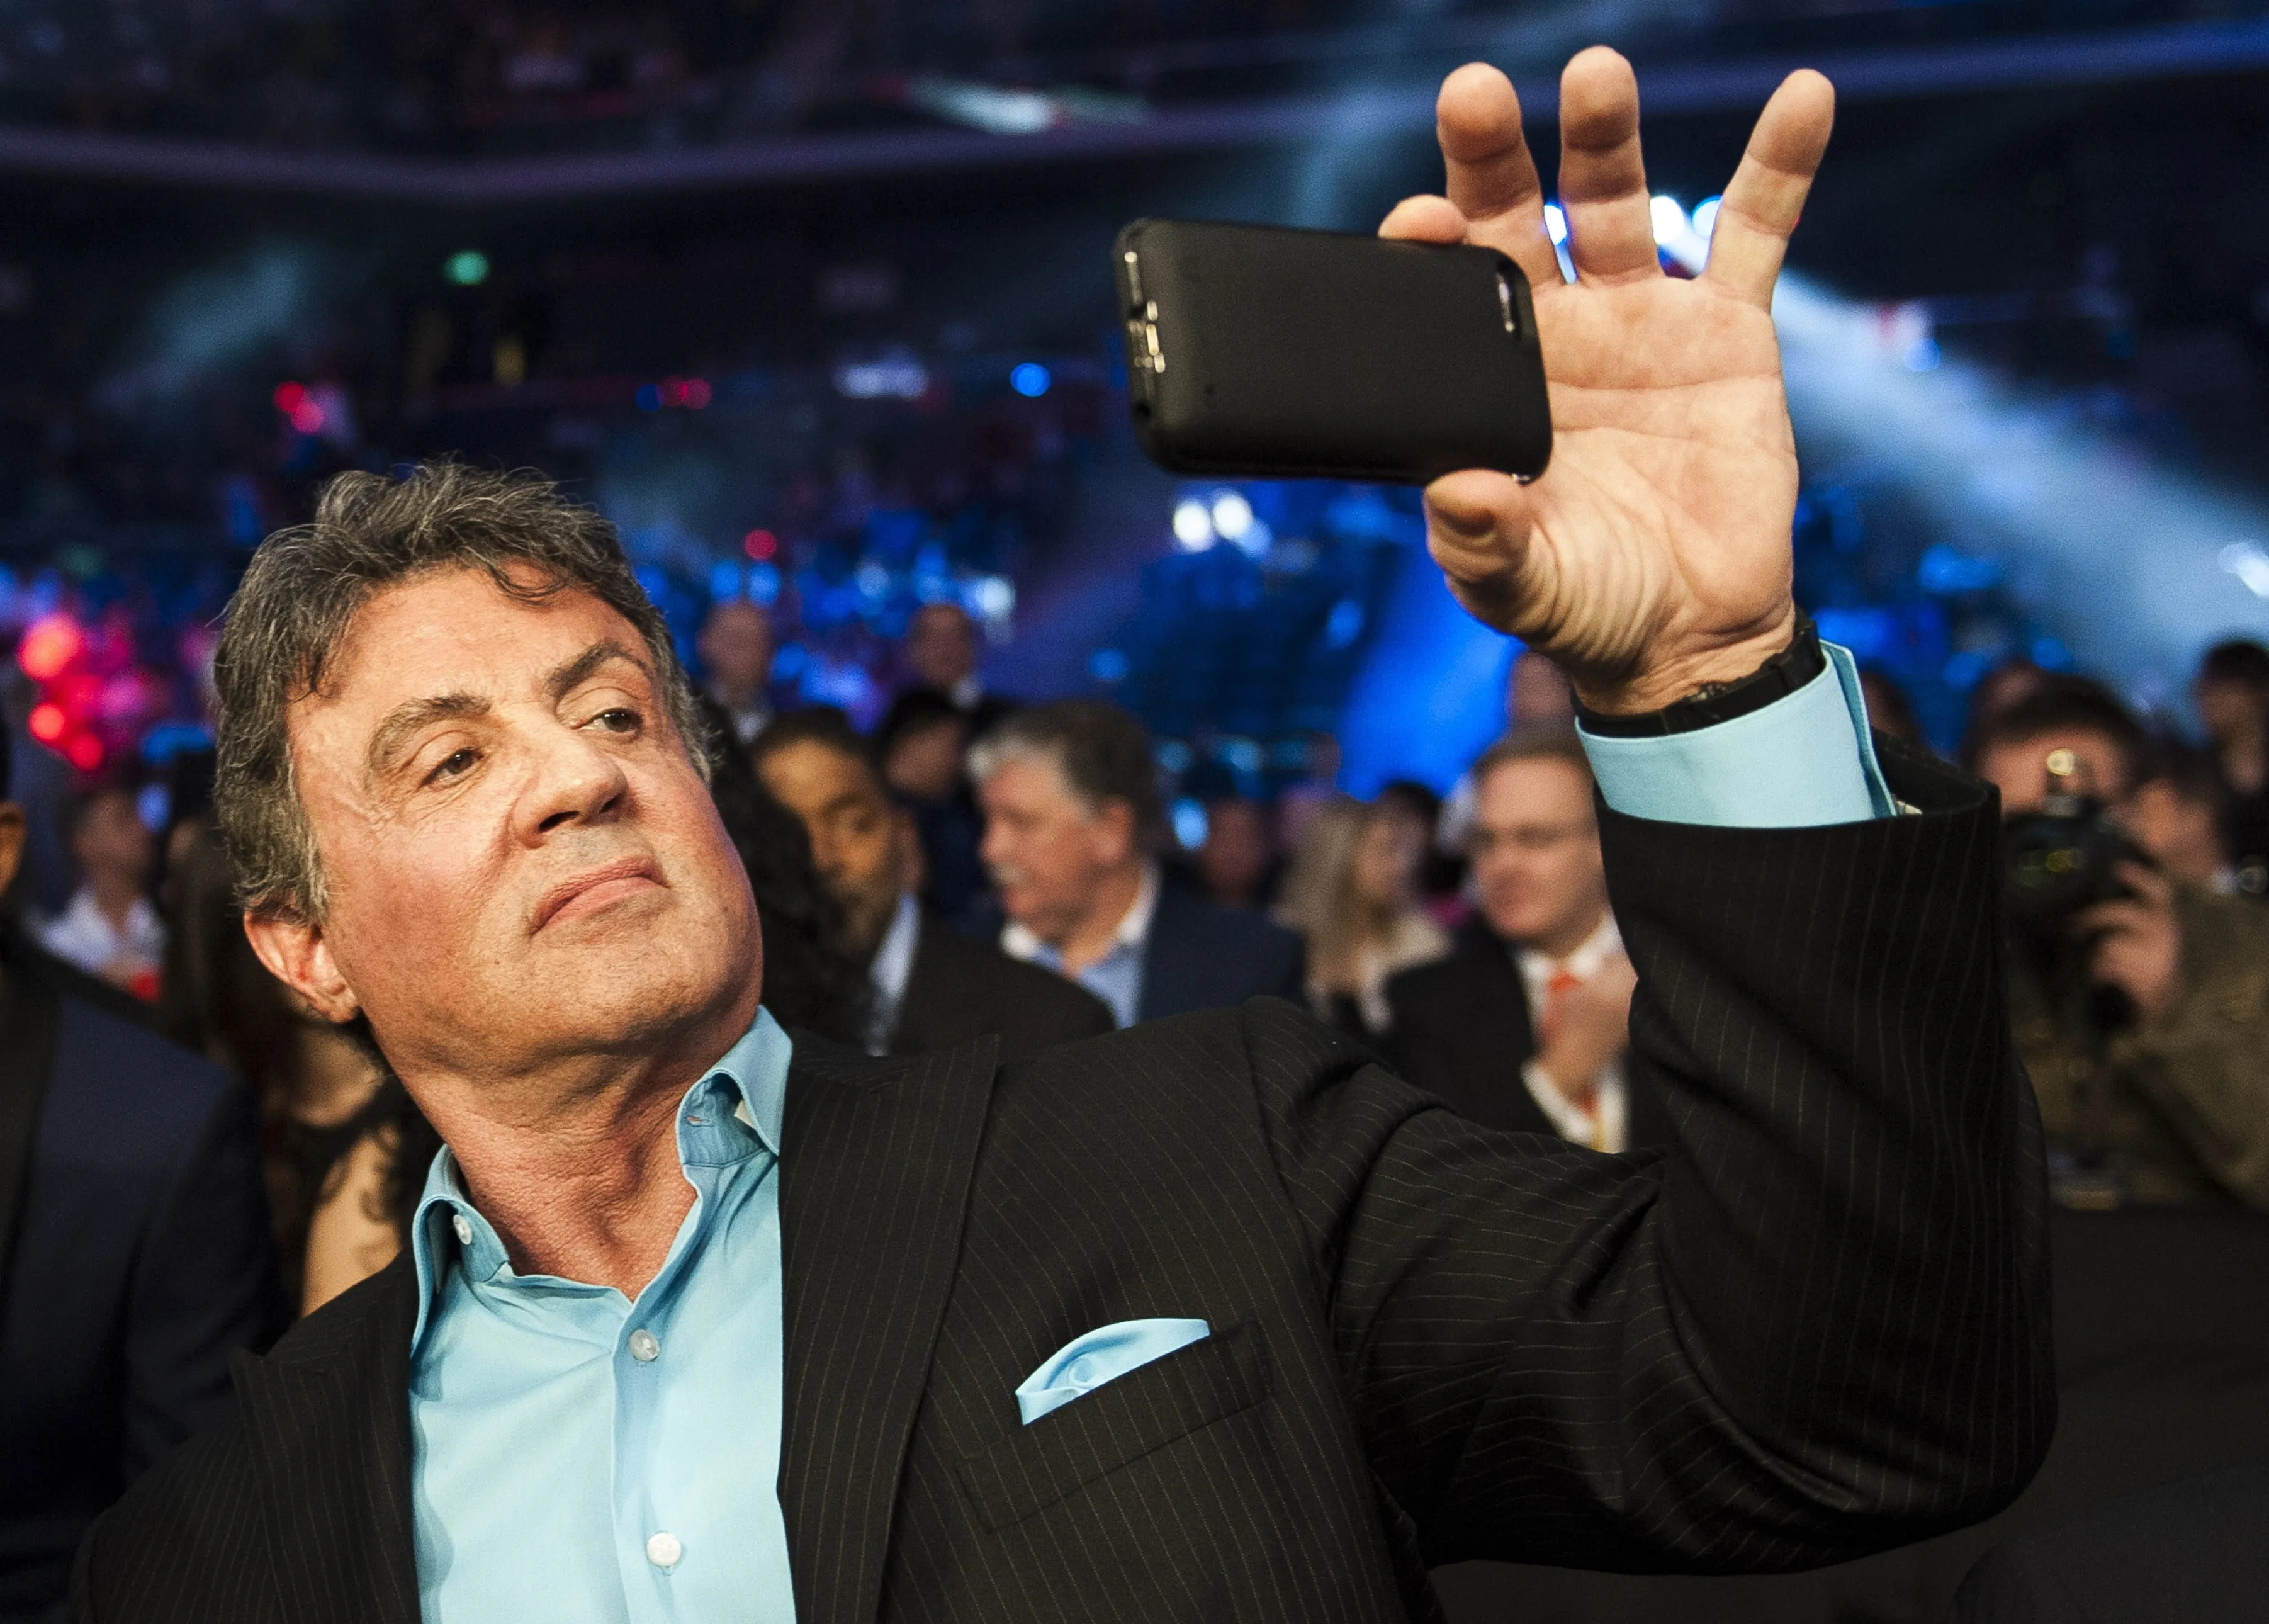 What to Do If Your Social Security Number Was Leaked like Sylvester Stallone&#039;s